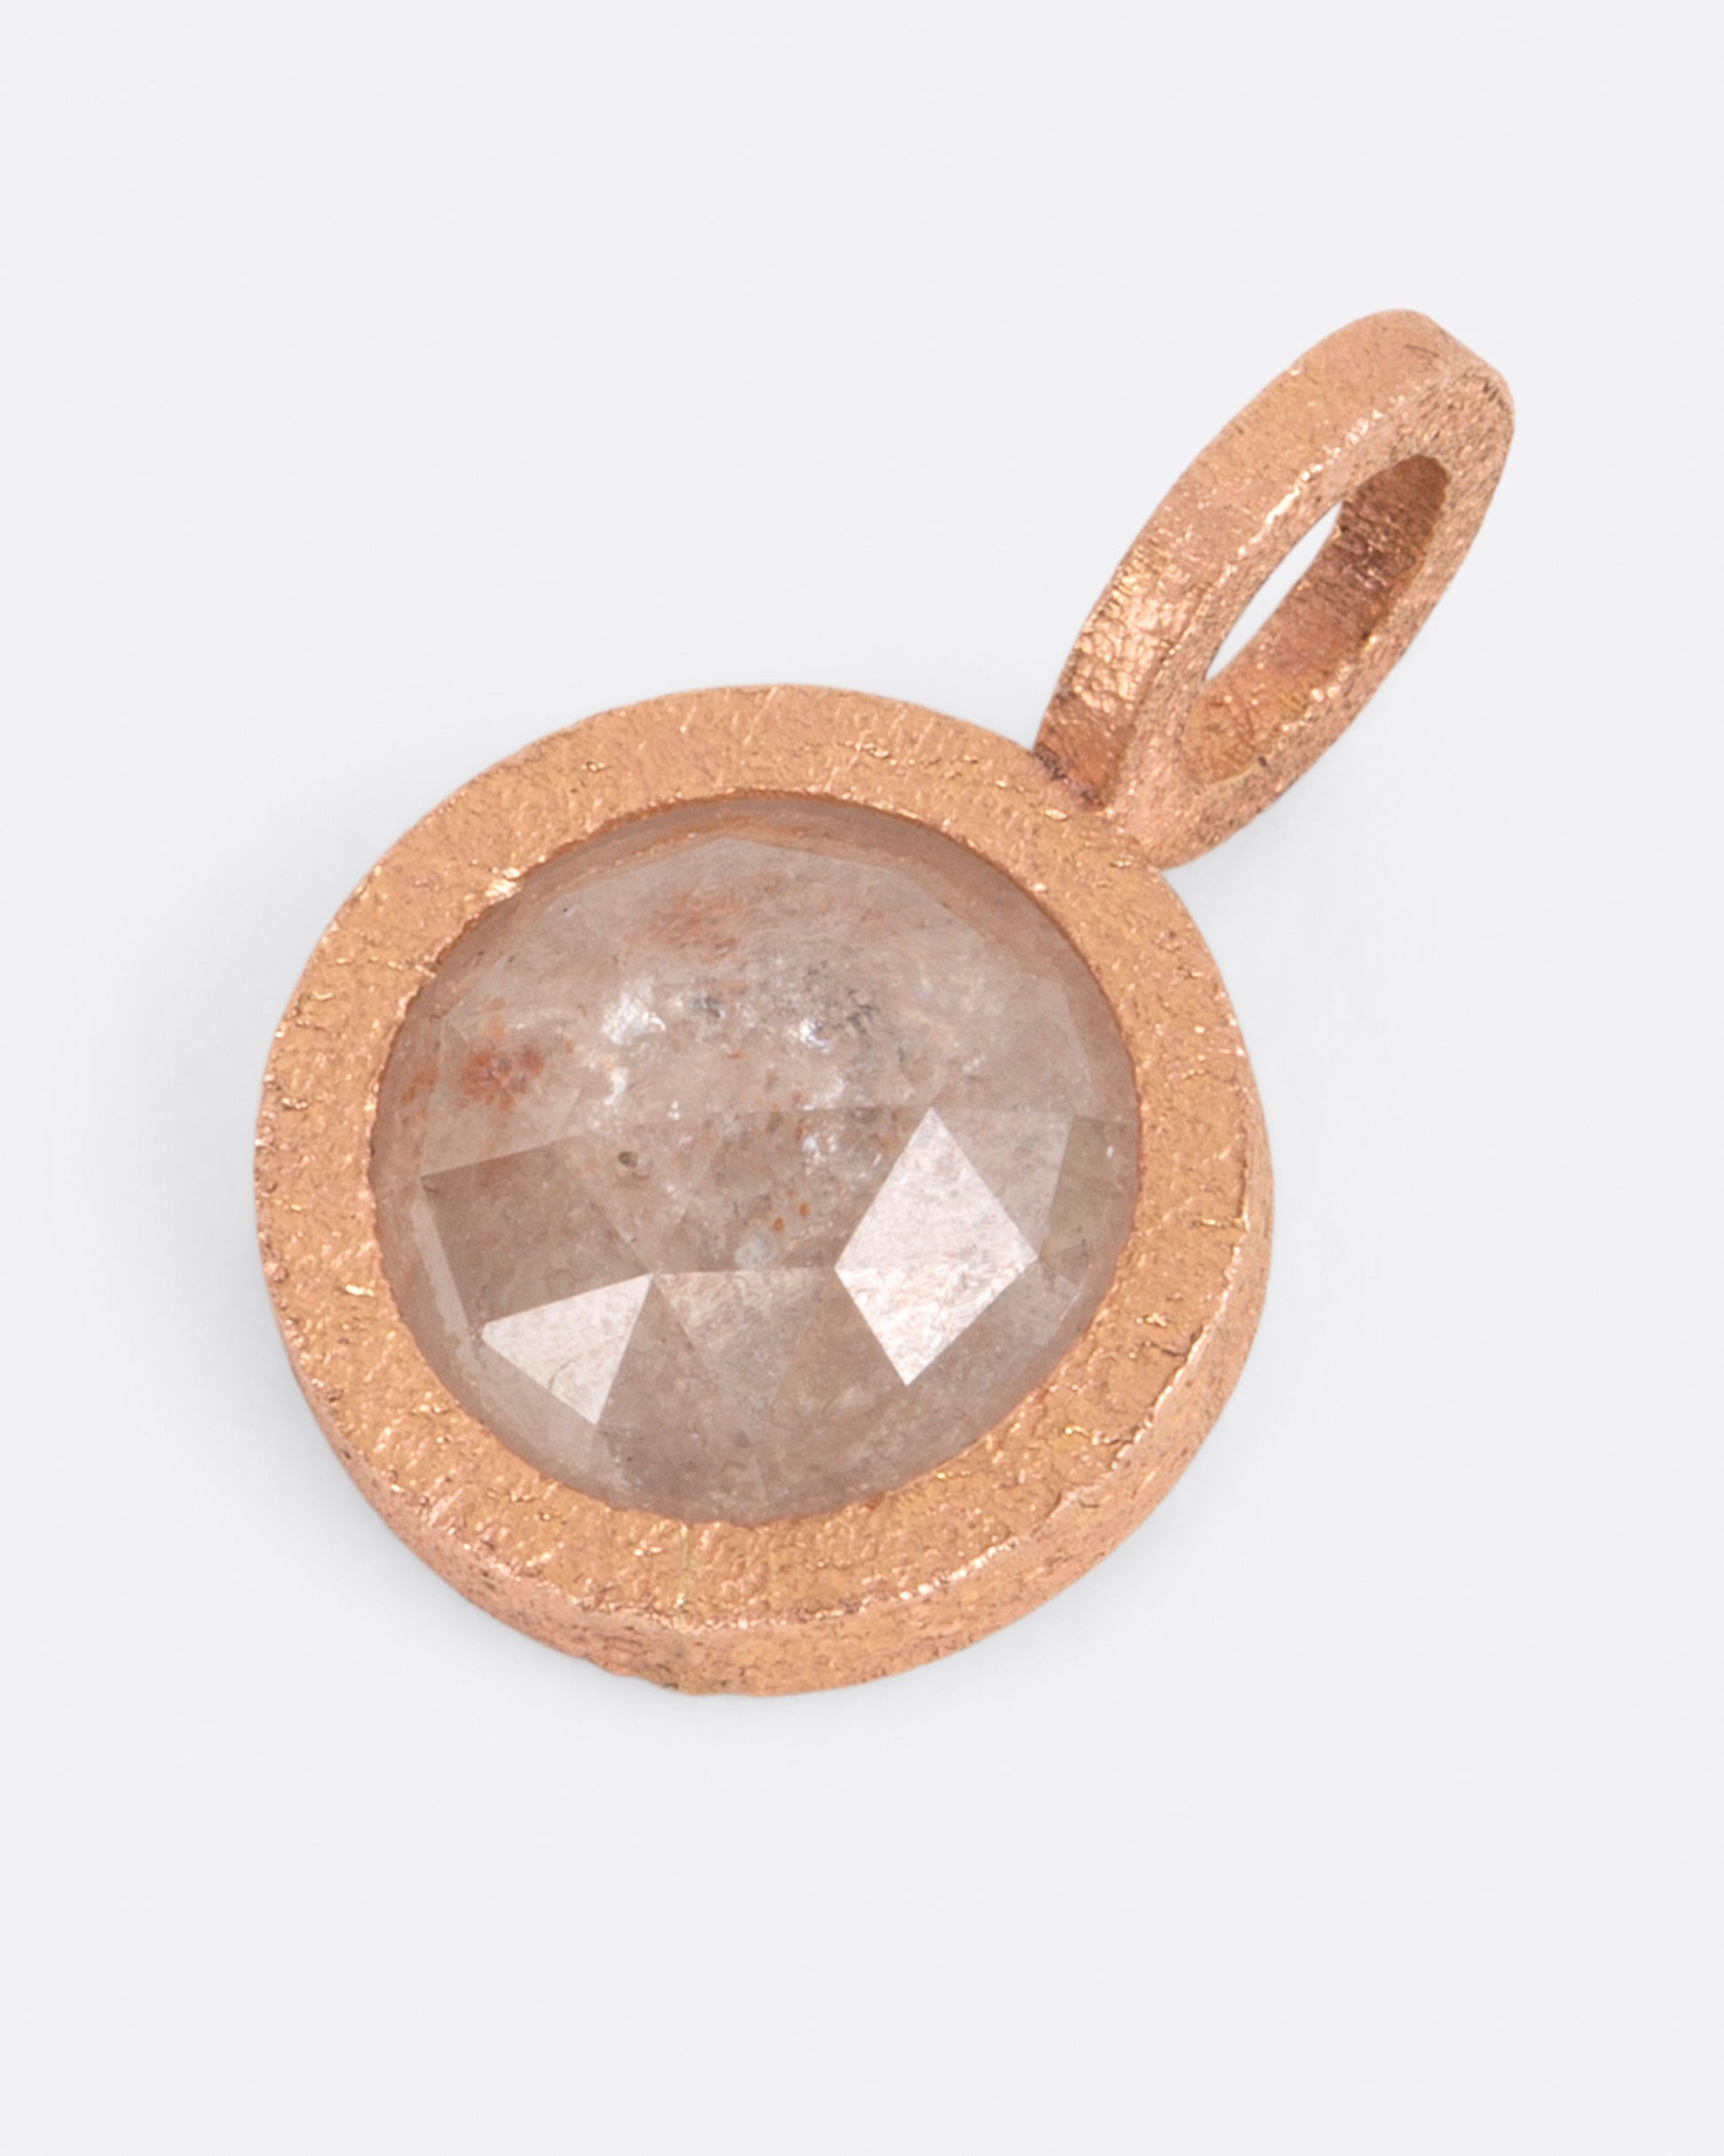 A pendant with a round icy gray diamond set in rose gold.